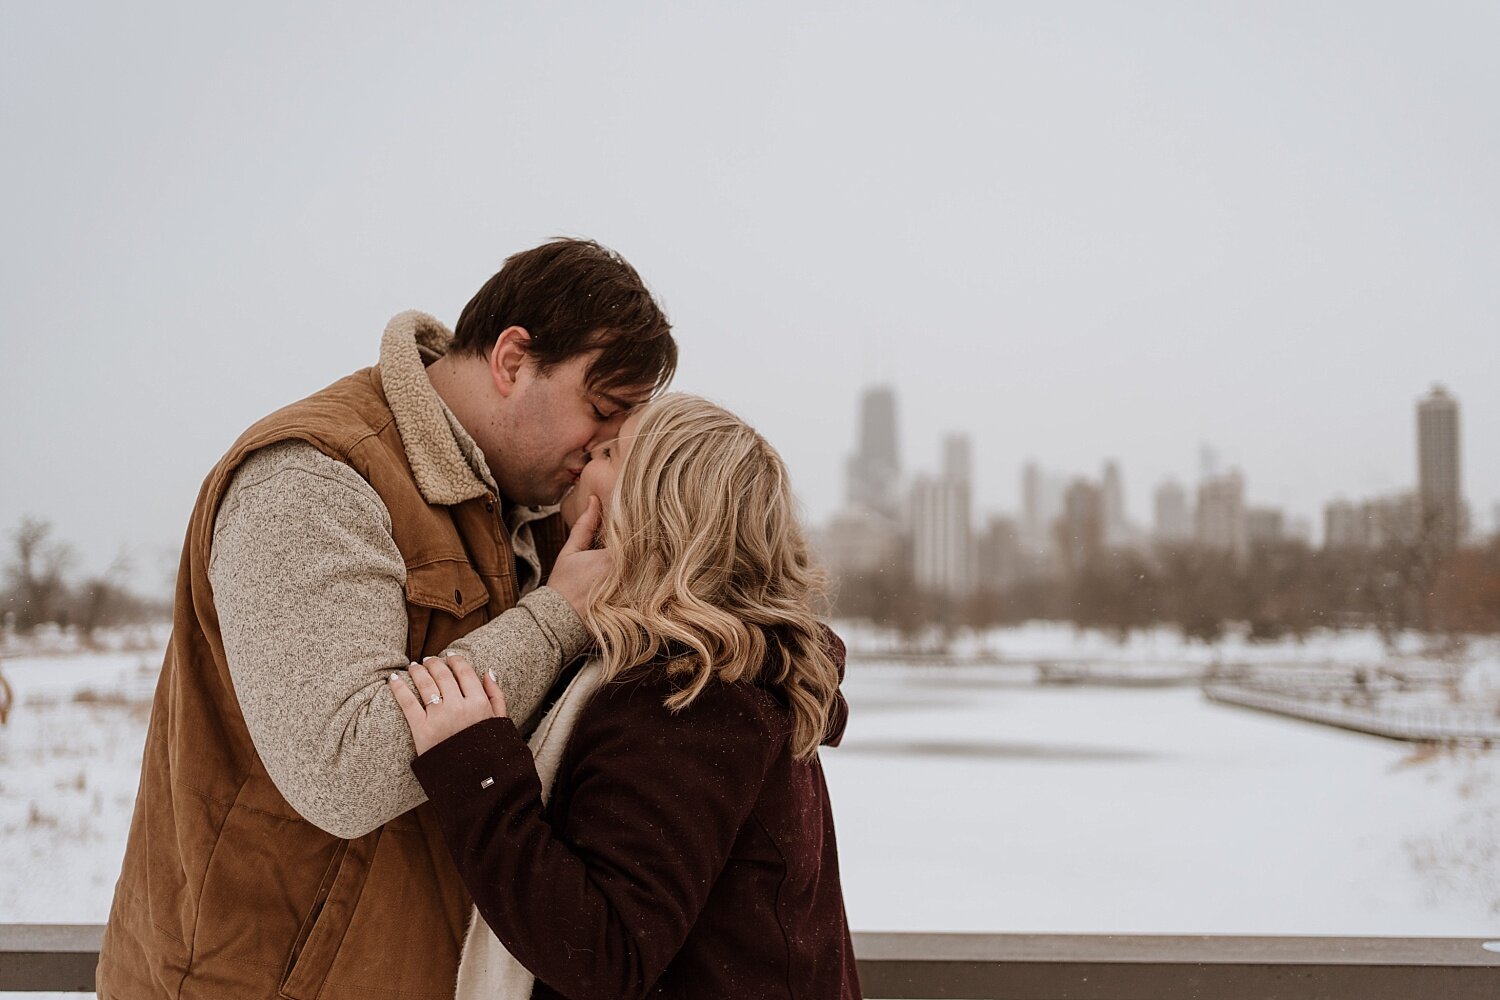 Tom proposed to Courtney at Montrose Harbor on Halloween, 2020. With the skyline in the background, both wanted to incorporate that in their professional engagement session. We initially planned to shoot at the Promontory Point, however, with the sn…